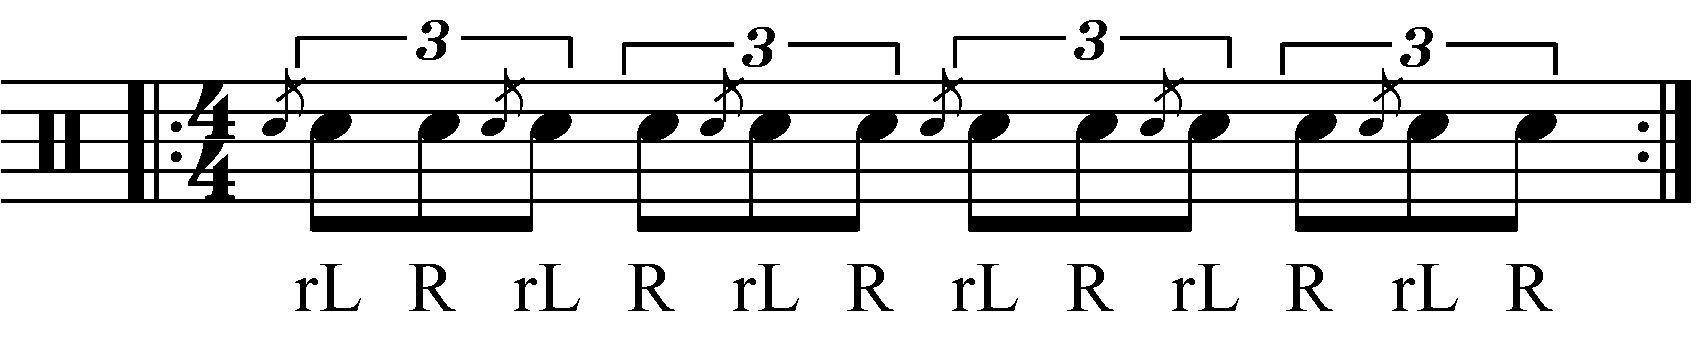 A Flam Tap eighth note triplets in reversed sticking.